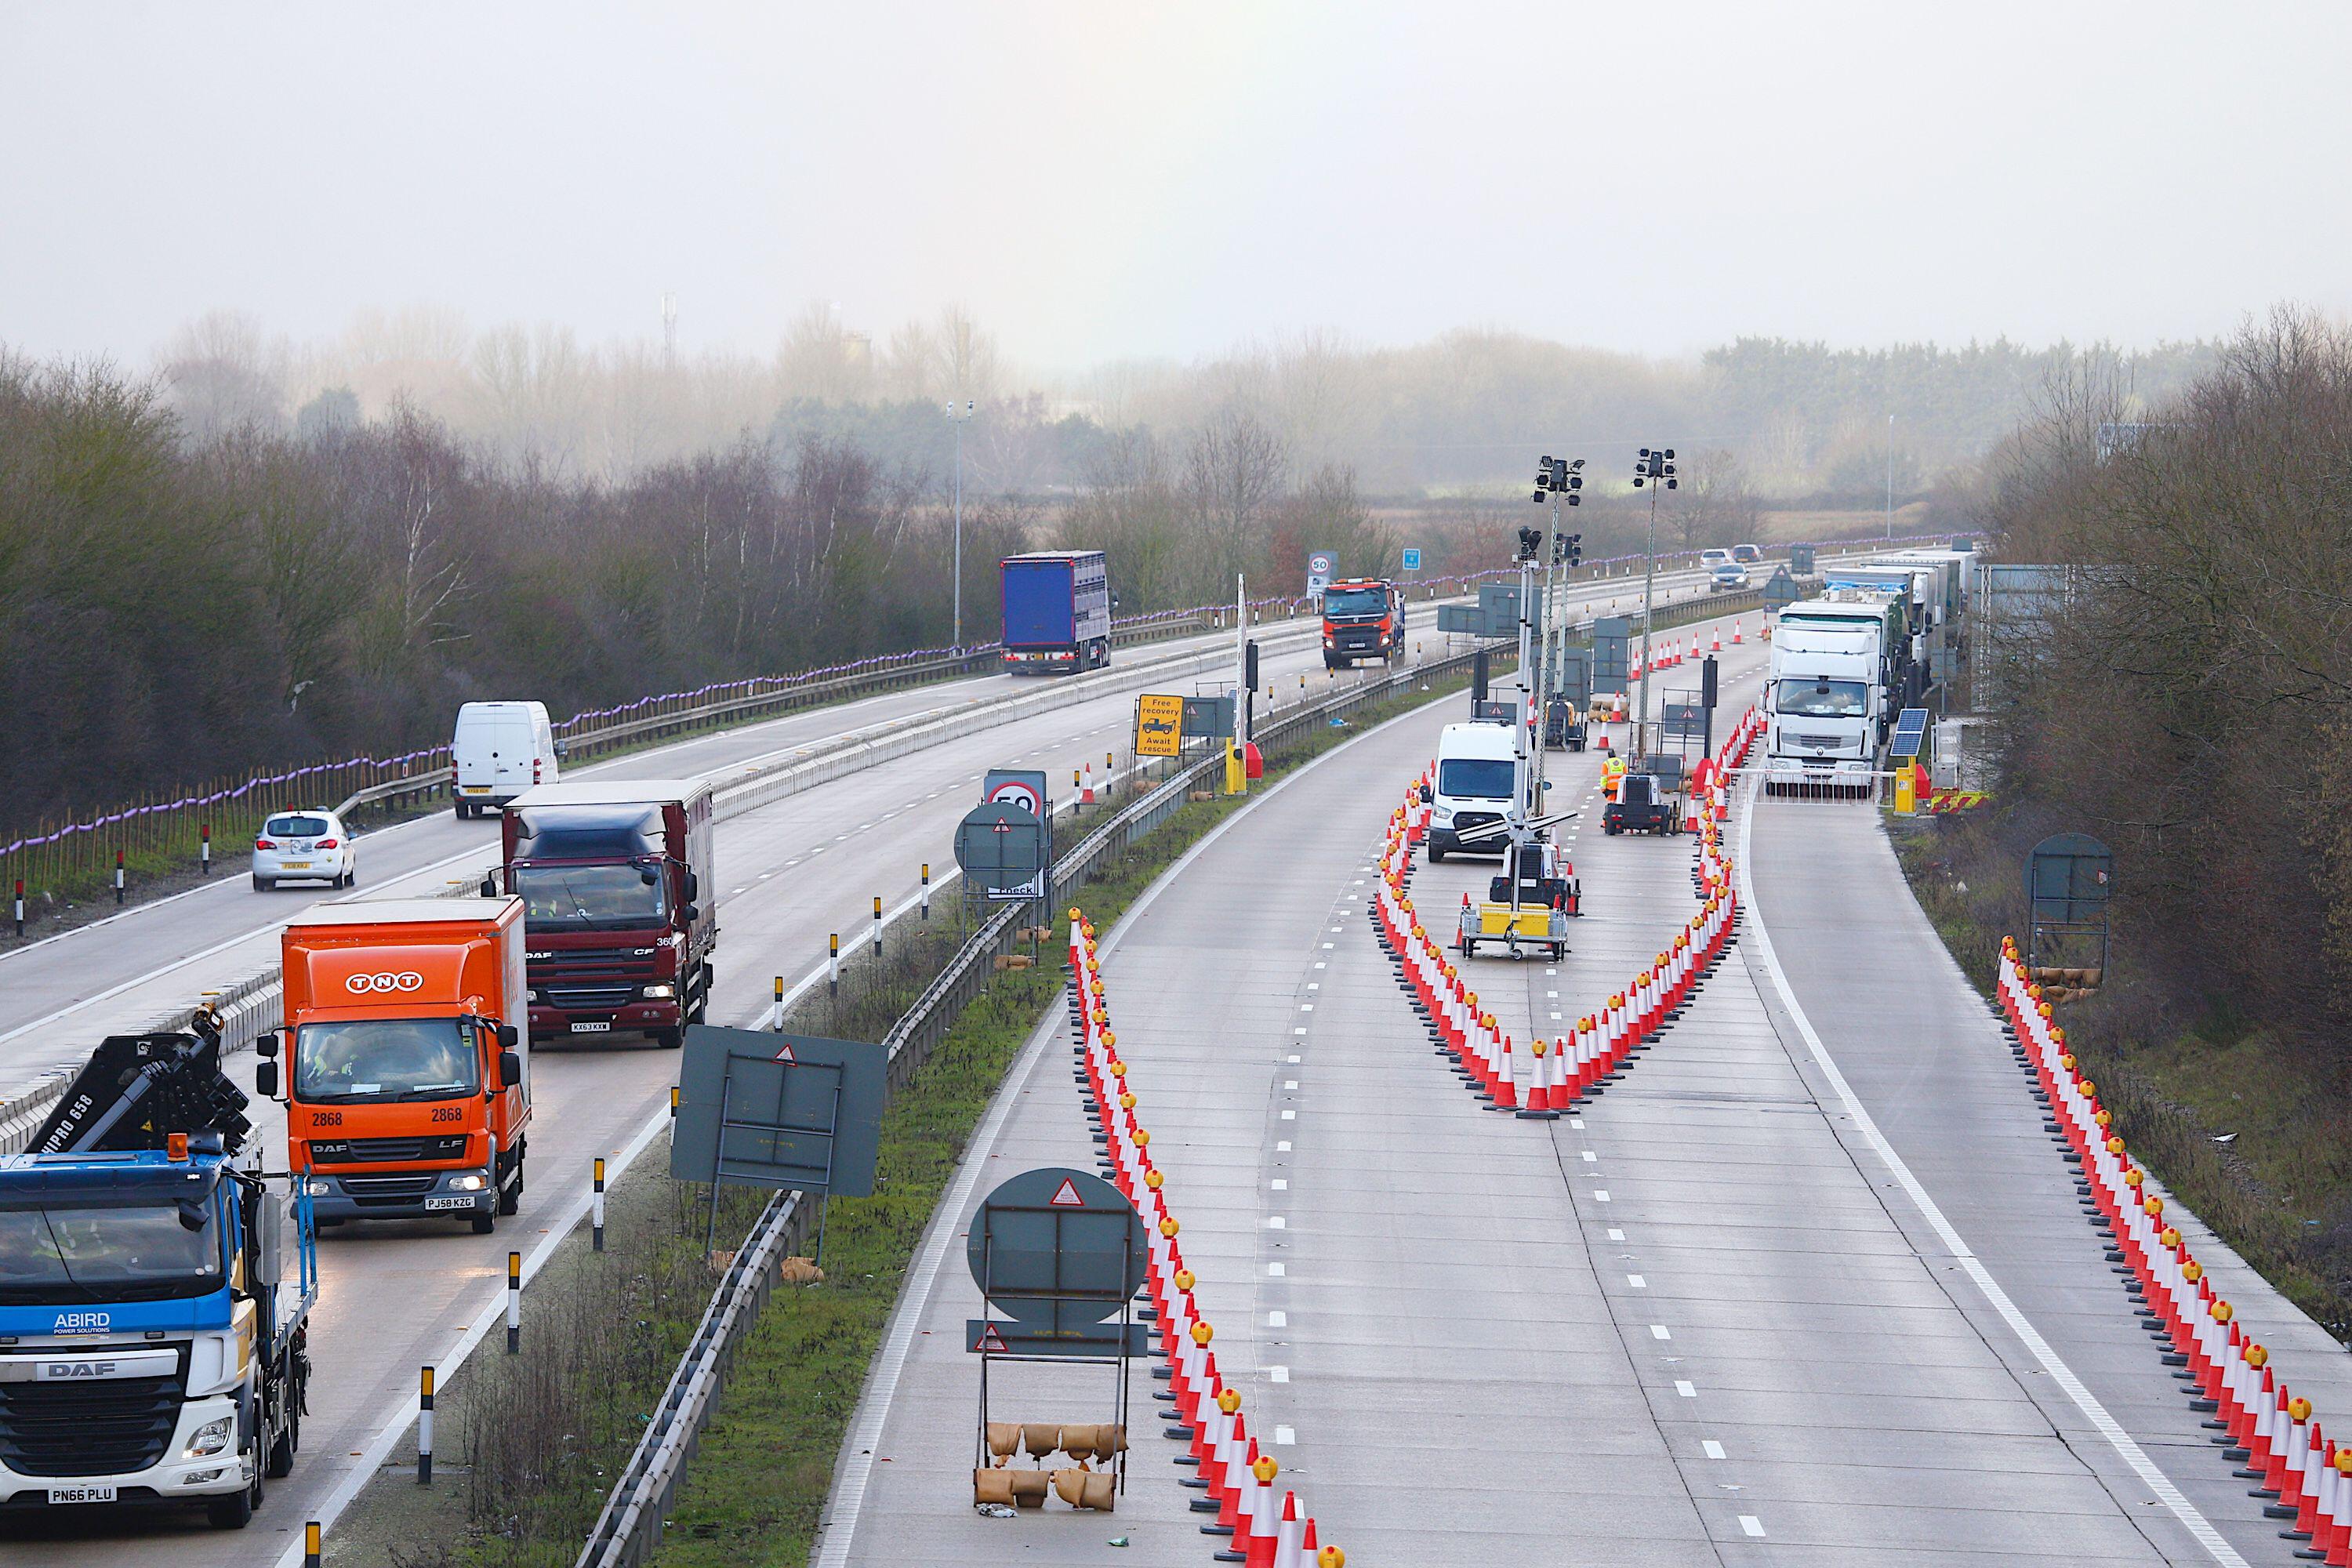 Queues on the M20 between junctions 8 and 9 during previous Operation Brock